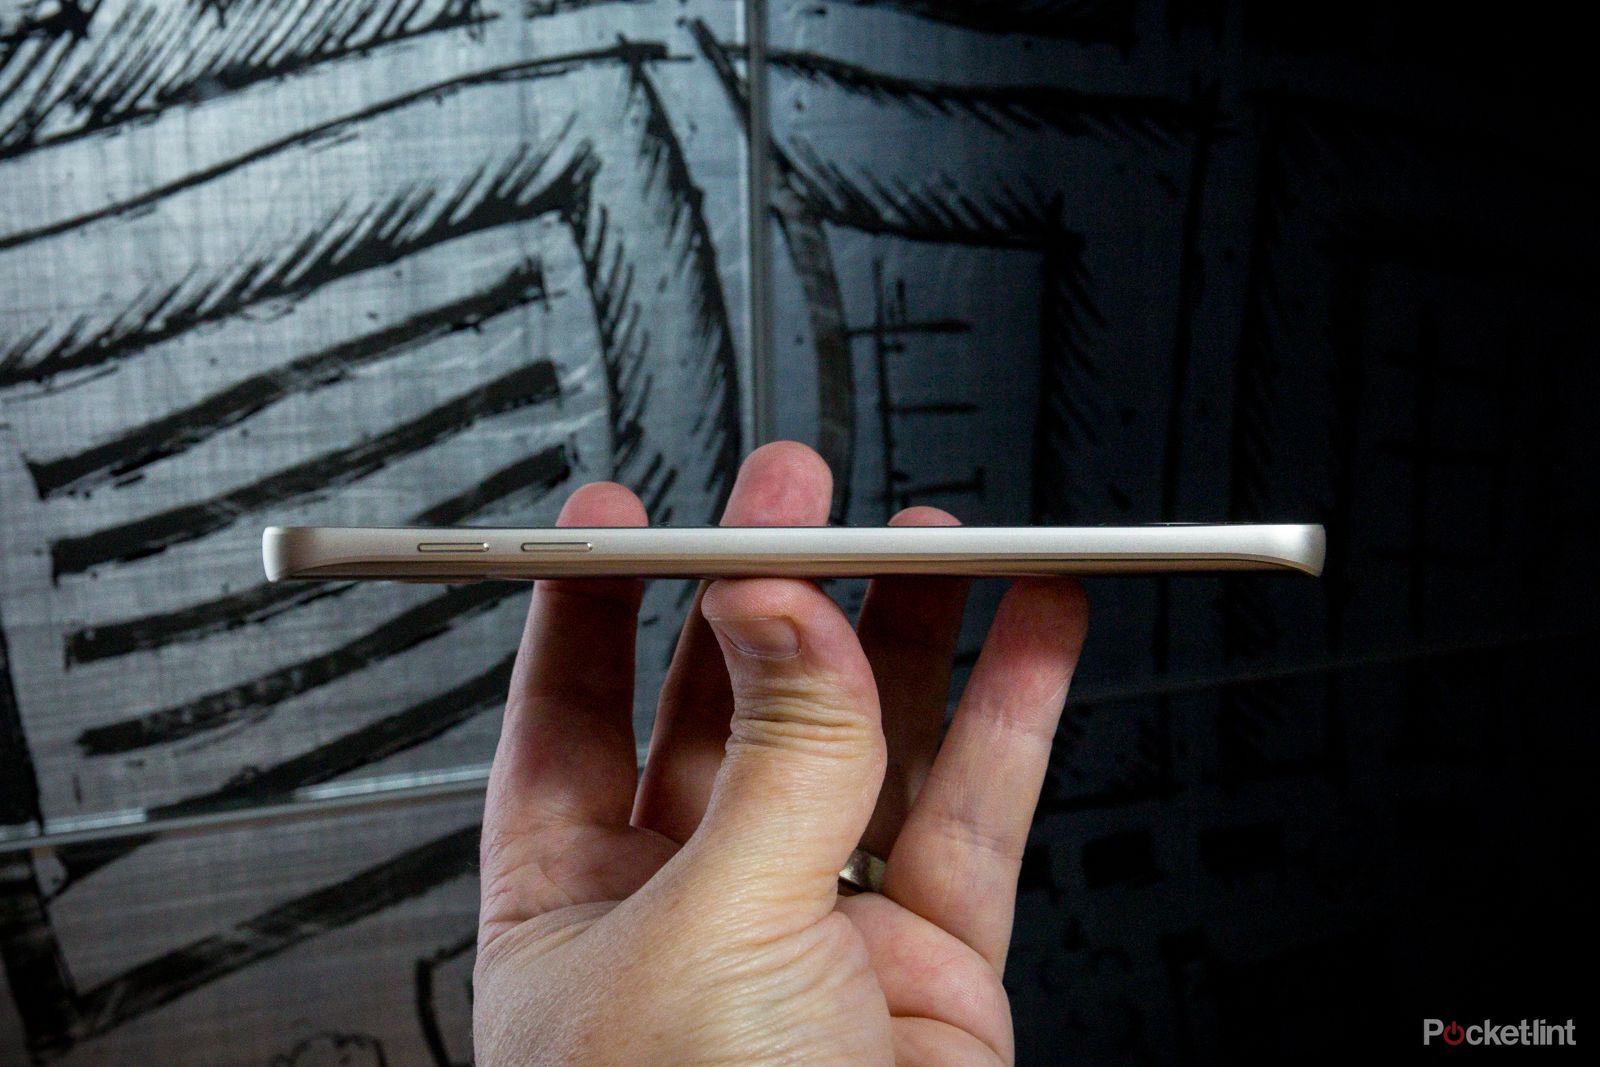 samsung galaxy note 5 hands on image 7